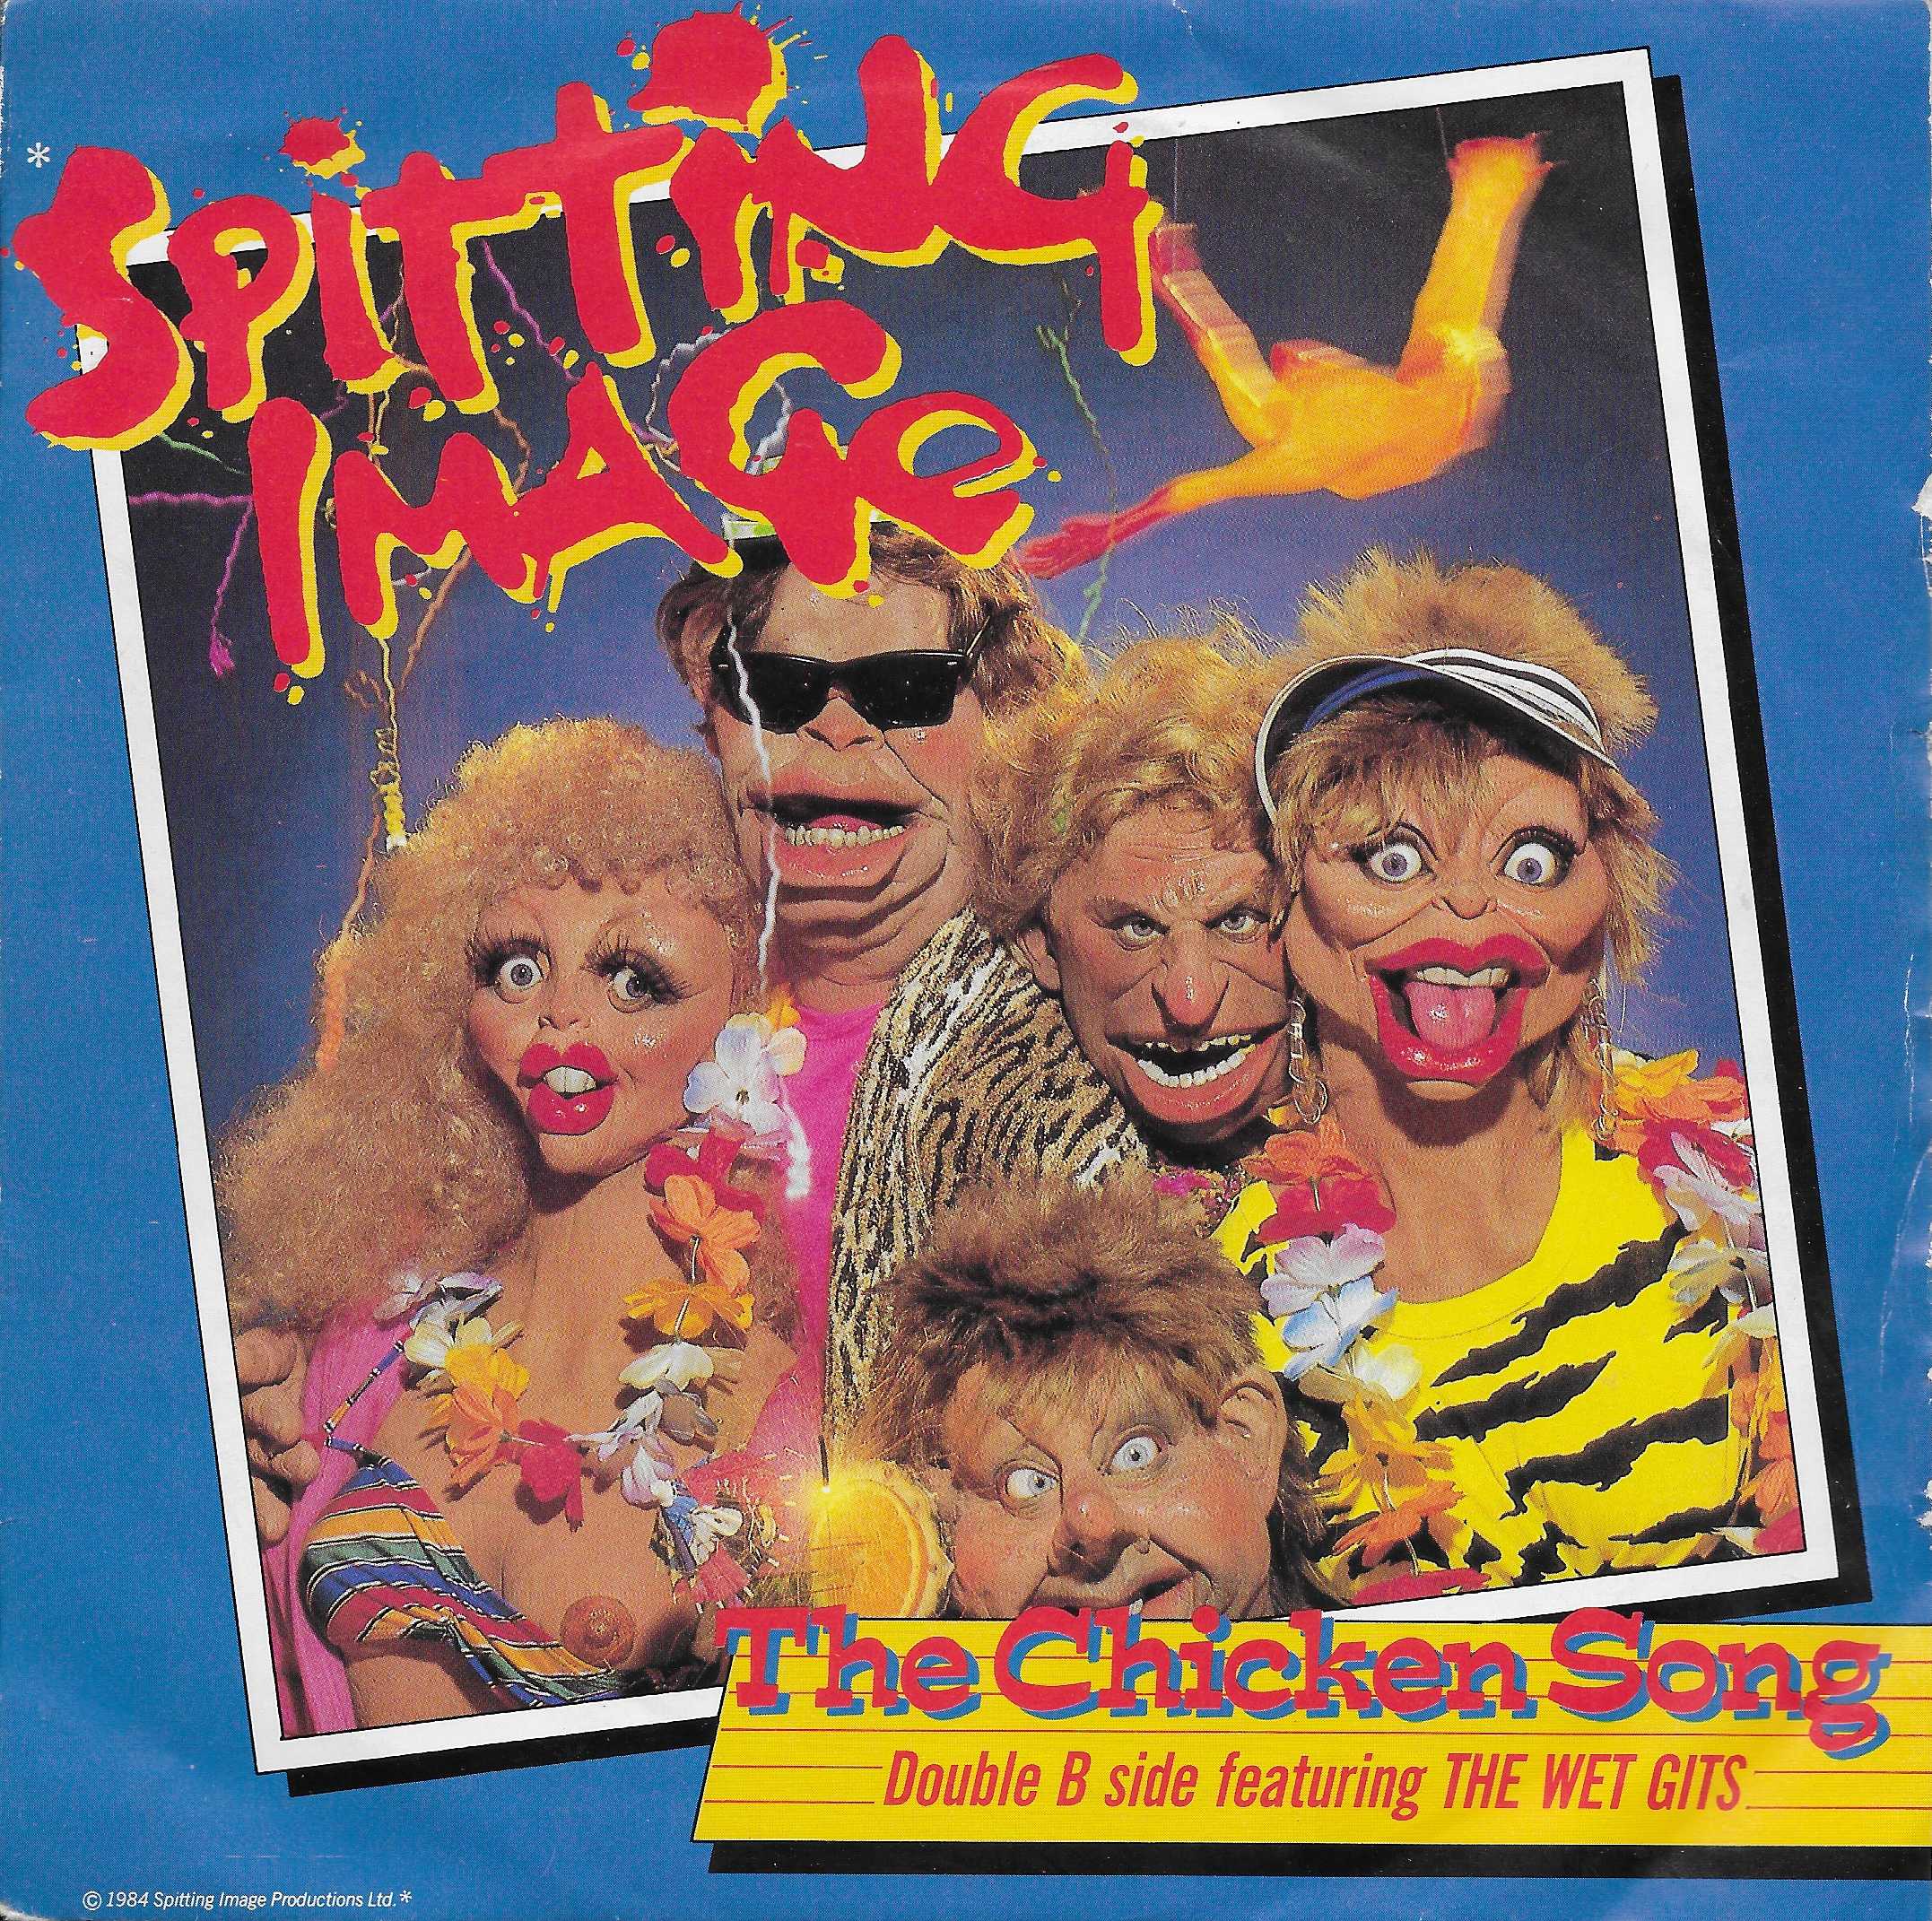 Picture of SPIT 1 The chicken song (Spitting image) by artist Pope / Grant / Naylor from ITV, Channel 4 and Channel 5 singles library